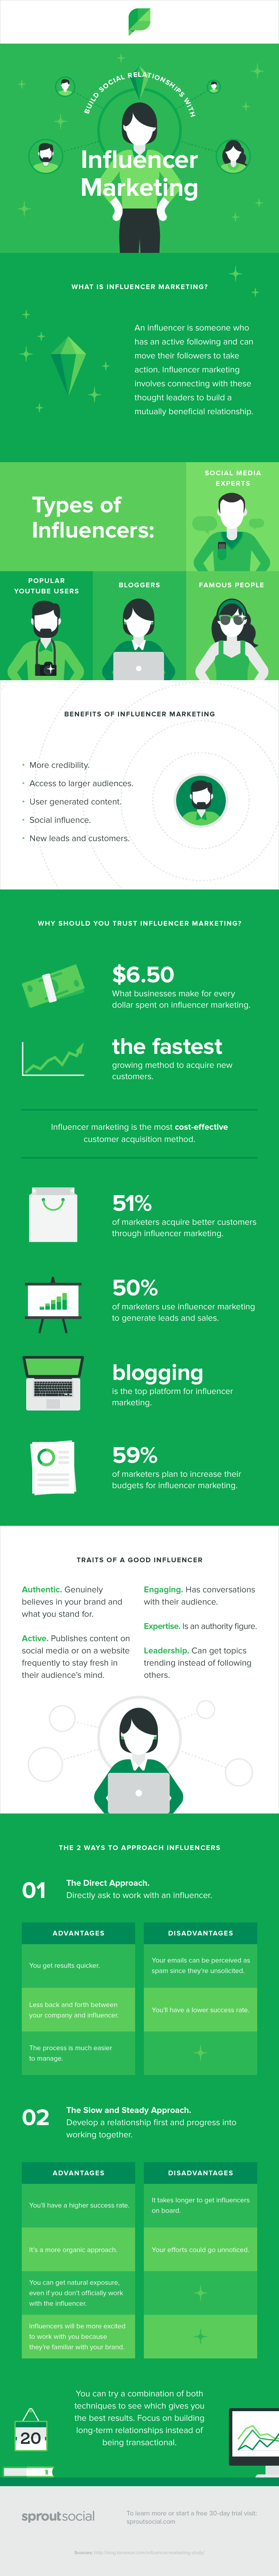 Infographie 260 - How to reach out influencers